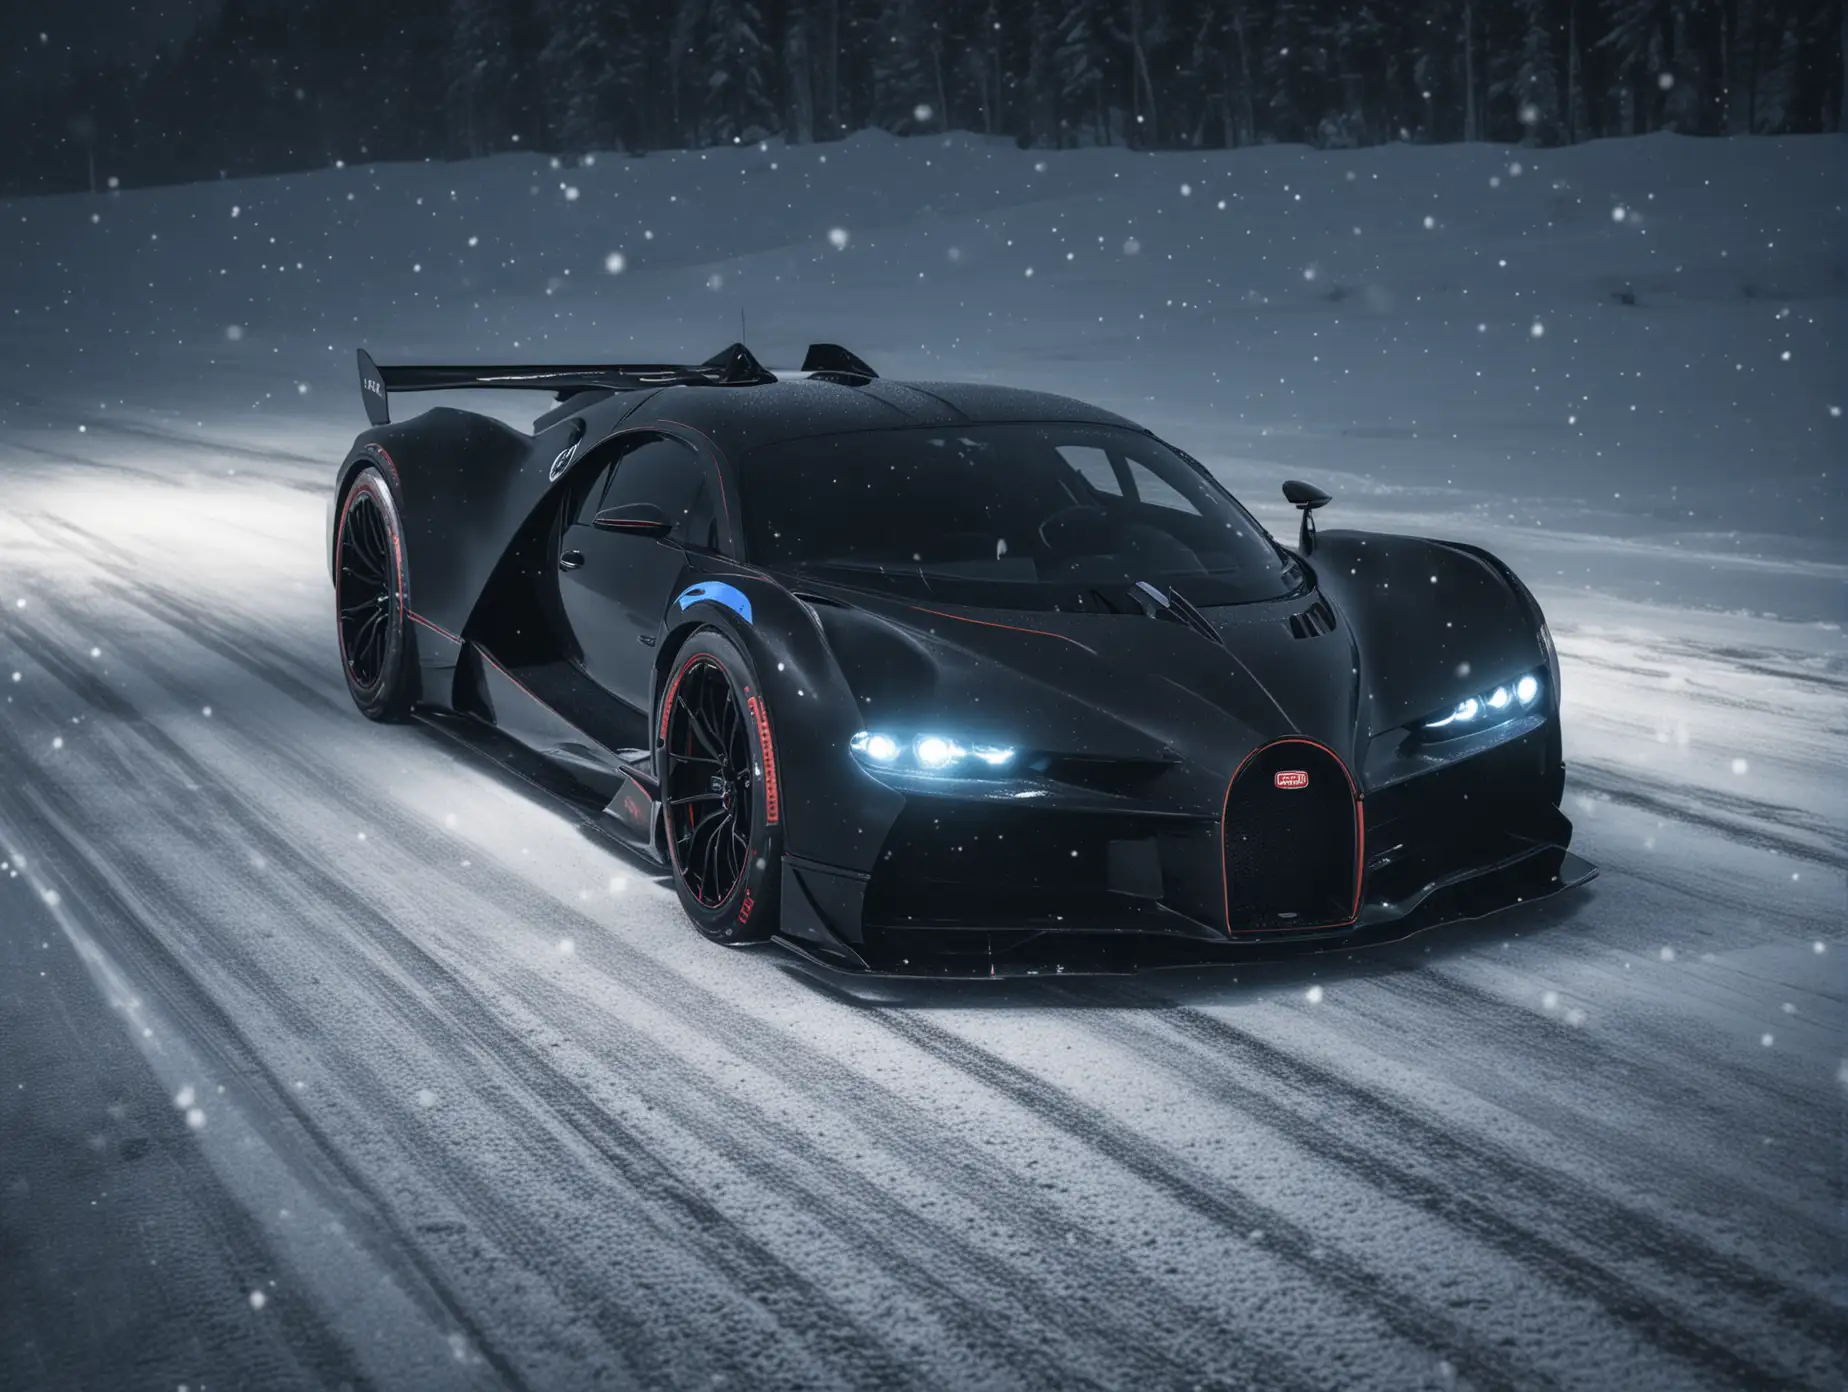 TUNED  bugatti bolide DRIVING AT NIGHT DRIFTING DARK COLORS THE ROAD BLACK CARBON THE CAR COLOR darker make to  snow add light on the tires